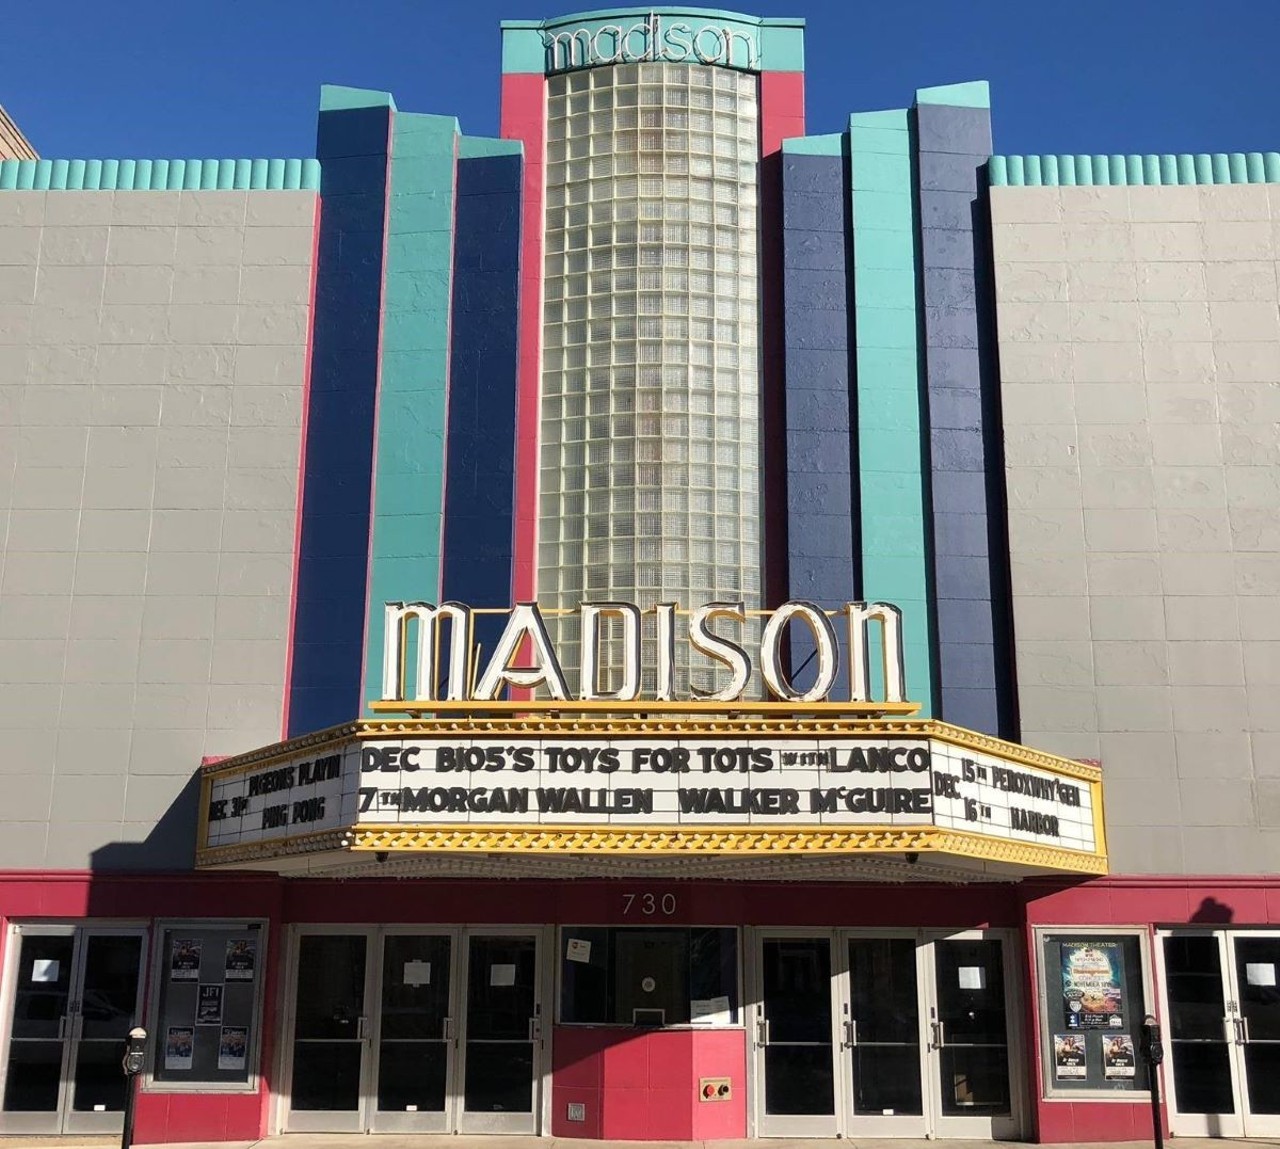 '90s Rock Night at Madison Theater
When: Nov. 3 at 8 p.m.
Where: Madison Theater, Covington
What: A night of '90s tribute bands.
Who: The Pretender, American Idiots, Only in Dreams and Disarm
Why: Because '90s music is the best music.